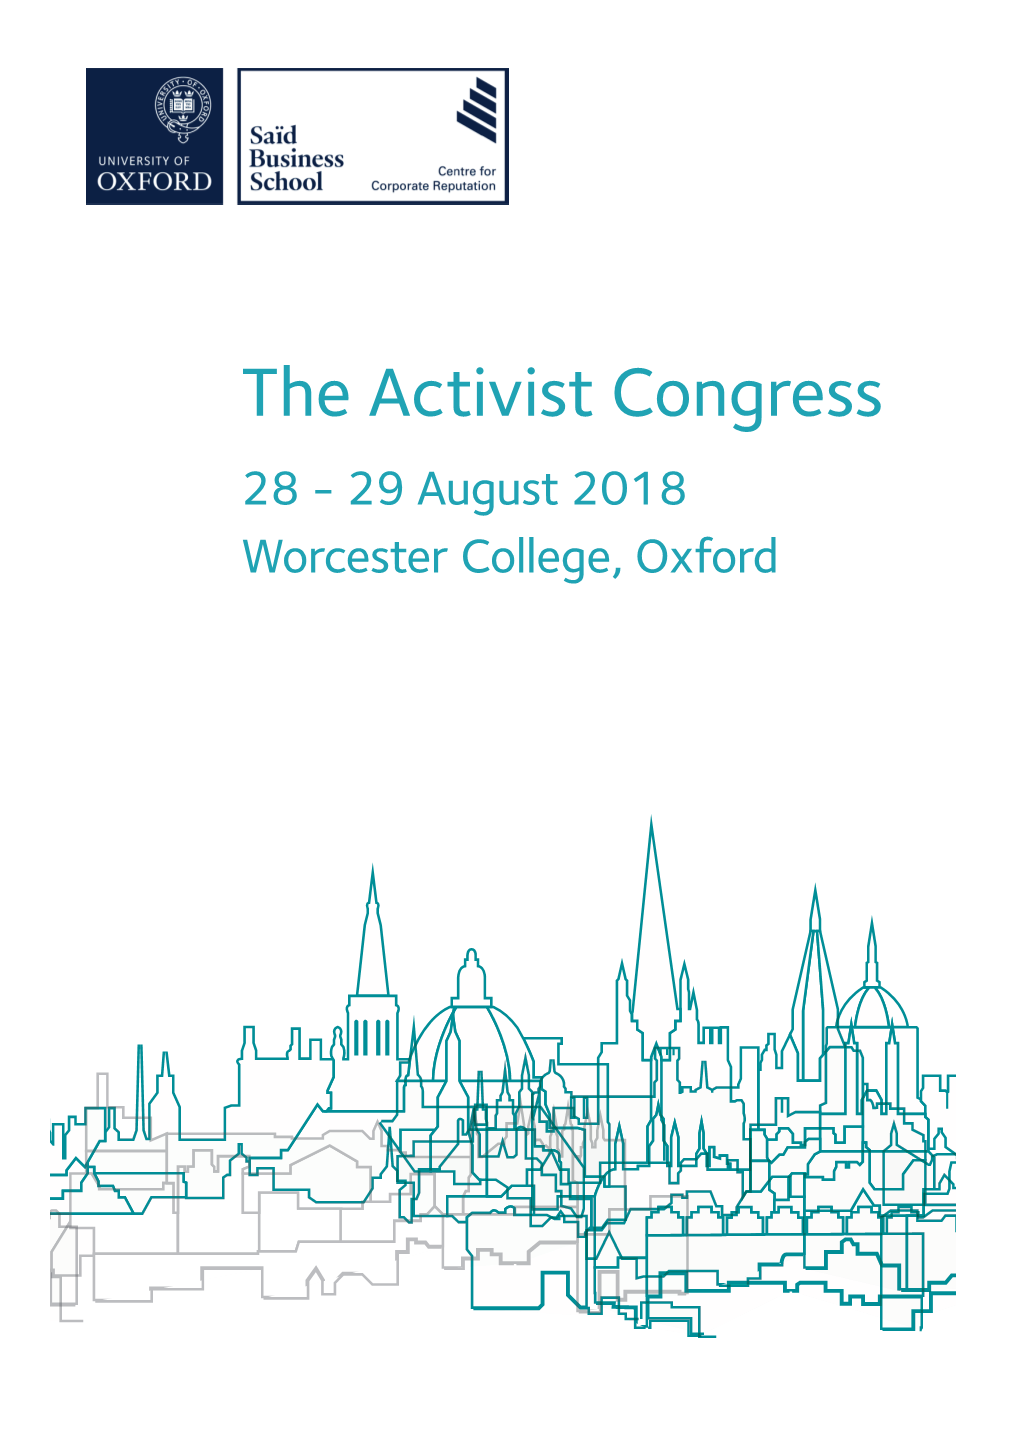 The Activist Congress 28 - 29 August 2018 Worcester College, Oxford the Oxford University Centre for Corporate Reputation